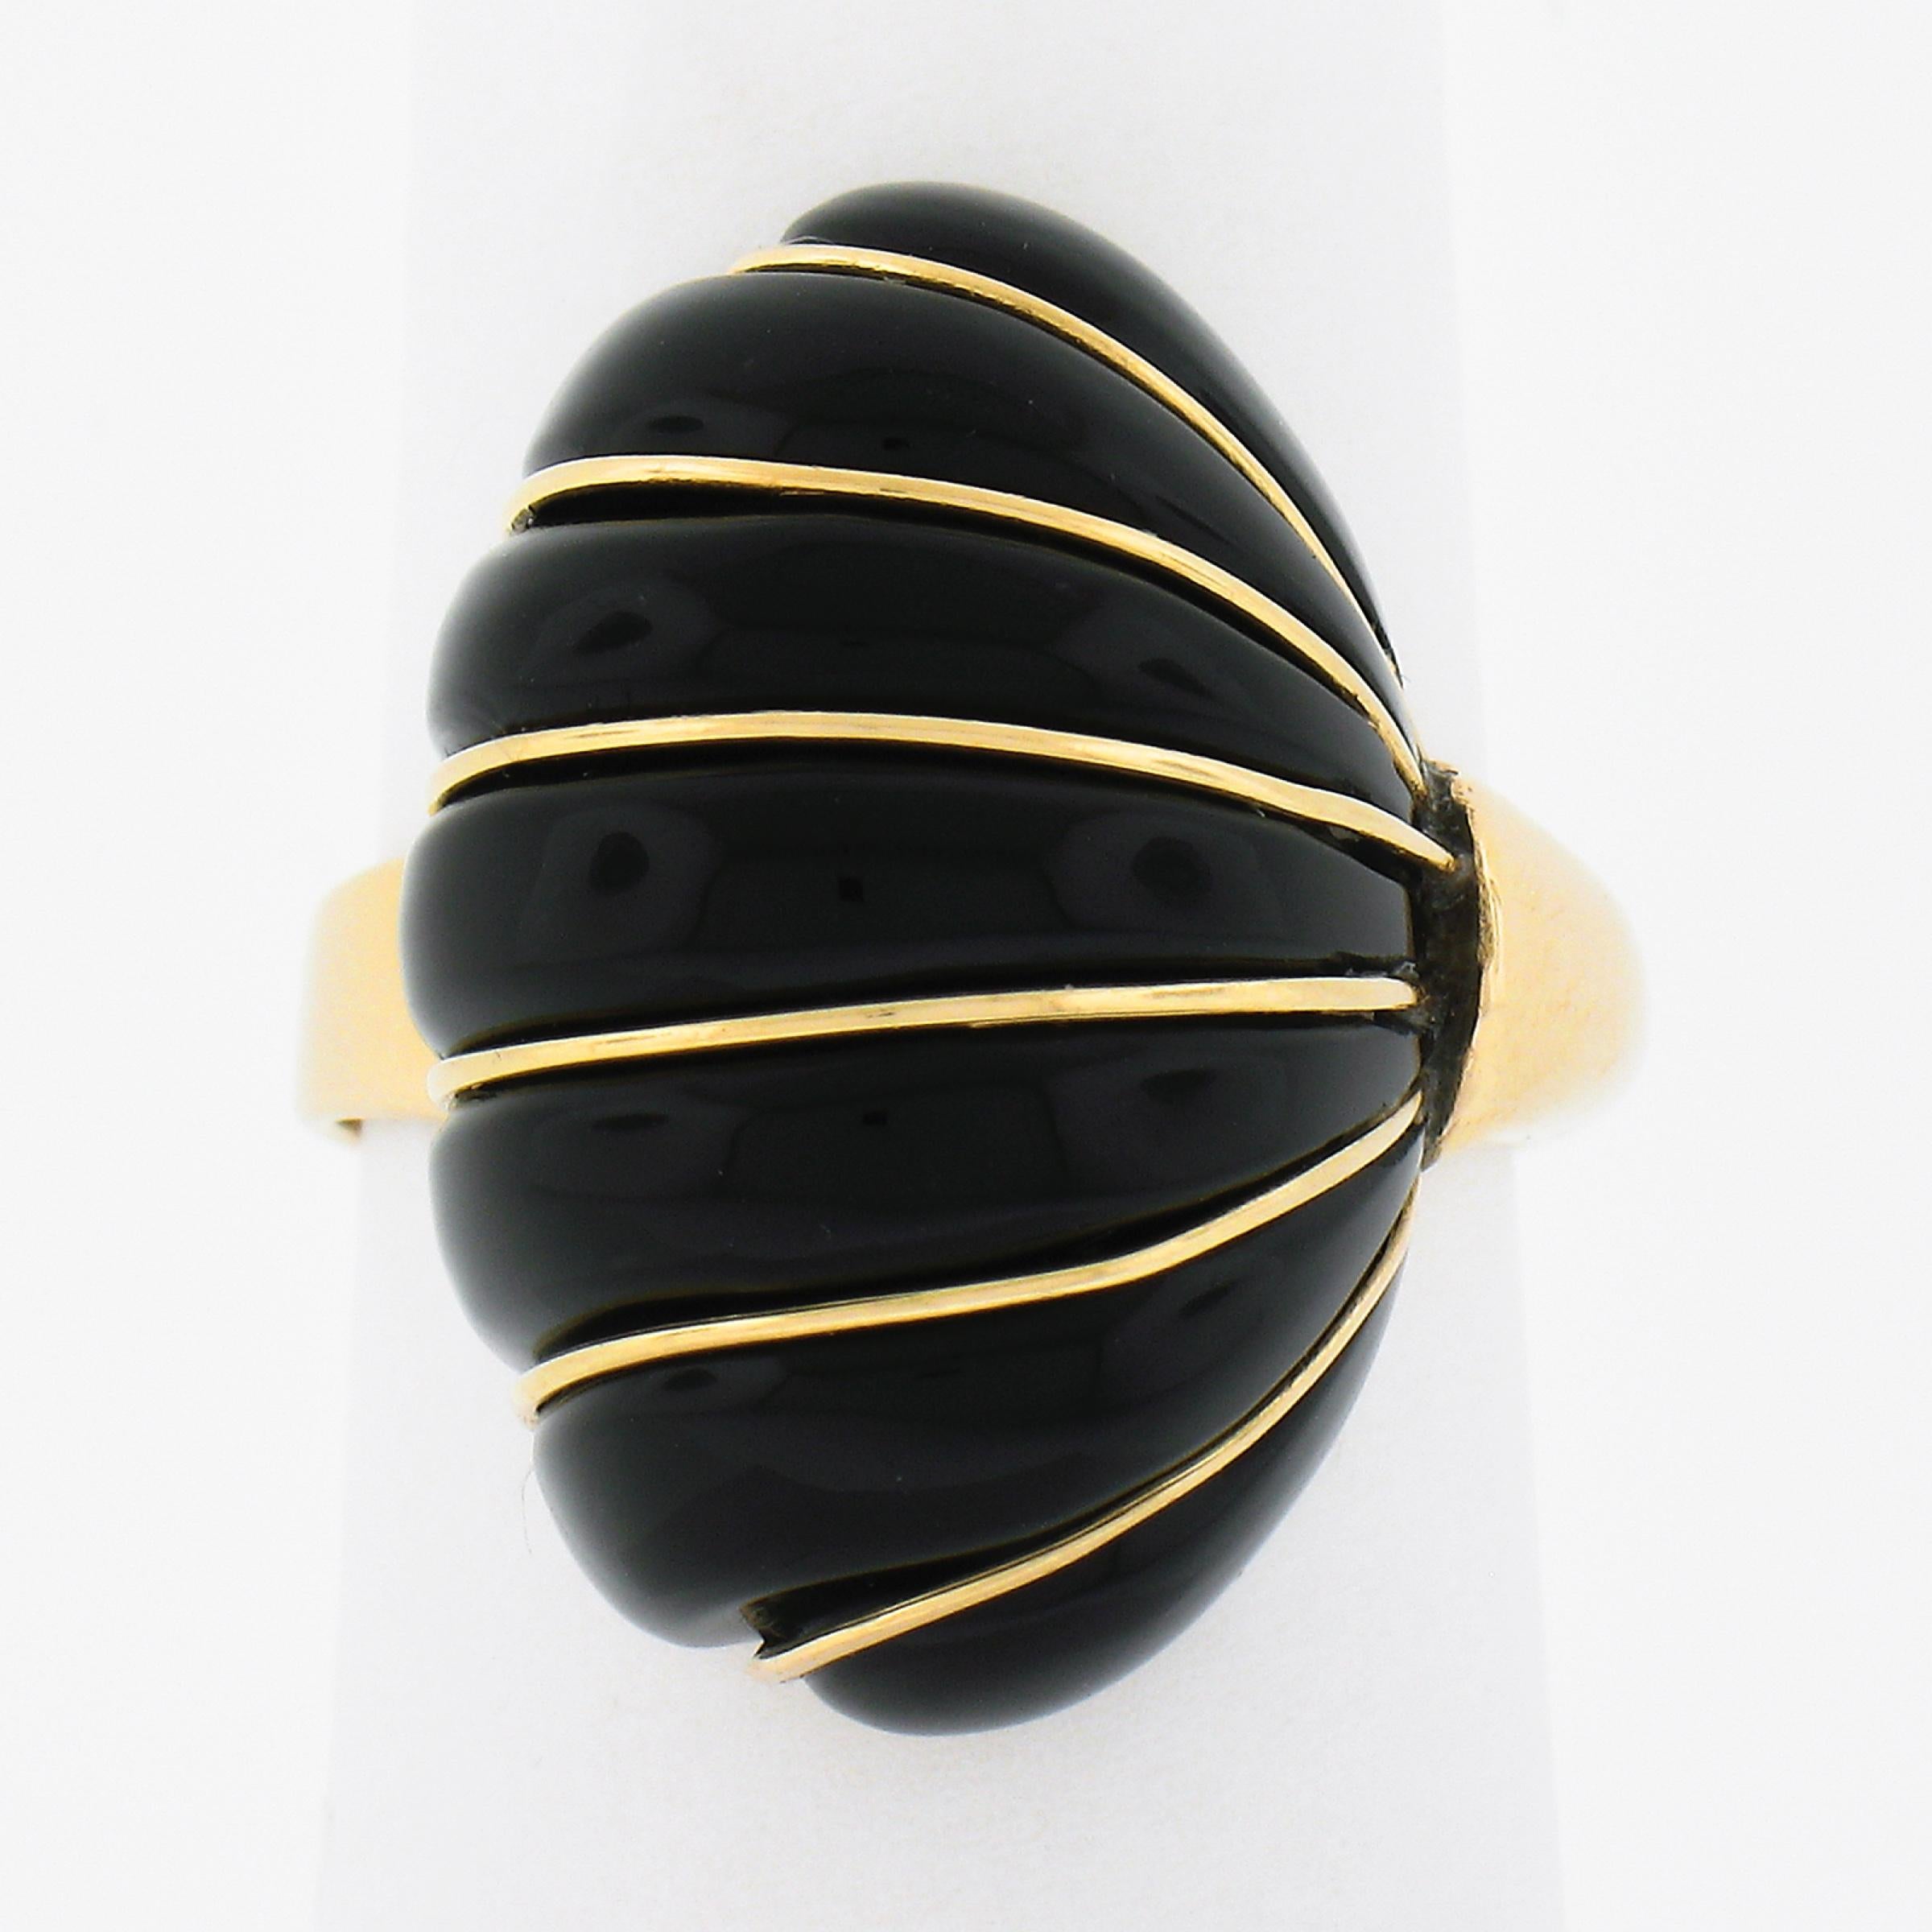 This beautiful cocktail ring is crafted in solid 14k yellow gold features a lovely, and truly unique, scalloped shell-like design constructed from a genuine black onyx stone. Its nice large size and pure black color give this ring its bold look and